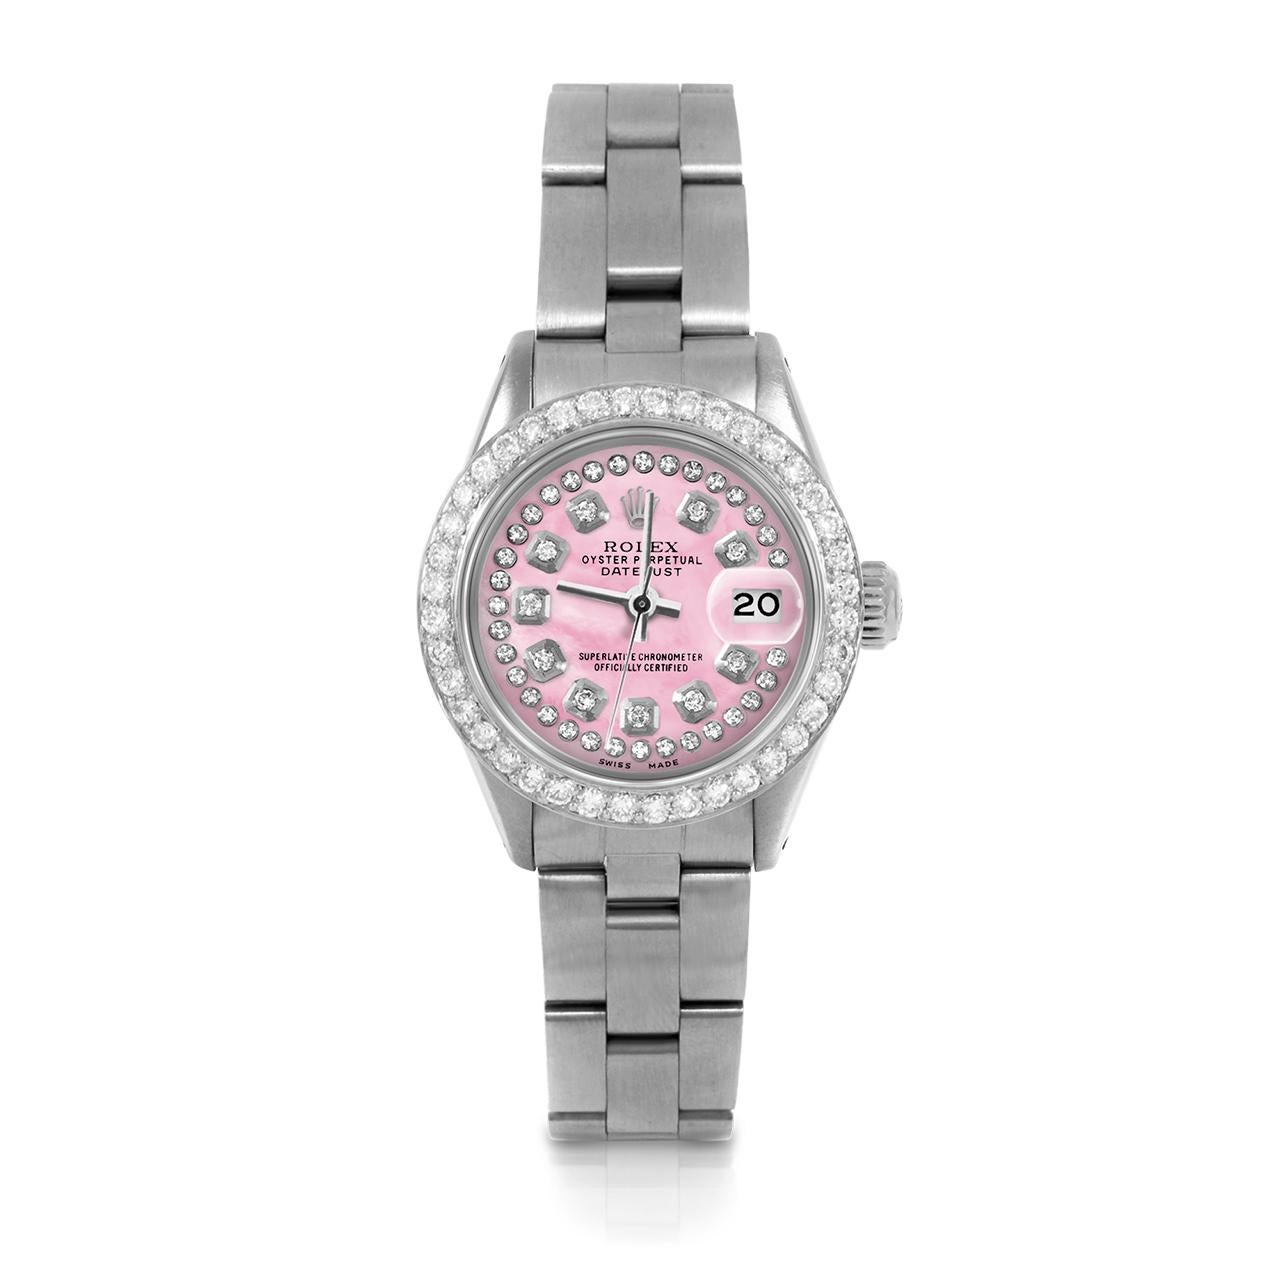 Pre-Owned Rolex 6917 Ladies 26mm Datejust Watch, Custom Pink Mother of Pearl String Diamond Dial & Custom 1ct Diamond Bezel on Rolex Stainless Steel Oyster Band.   

SKU 6917-SS-PMOP-STRD-BDS-OYS


Brand/Model:        Rolex Datejust
Model Number:   